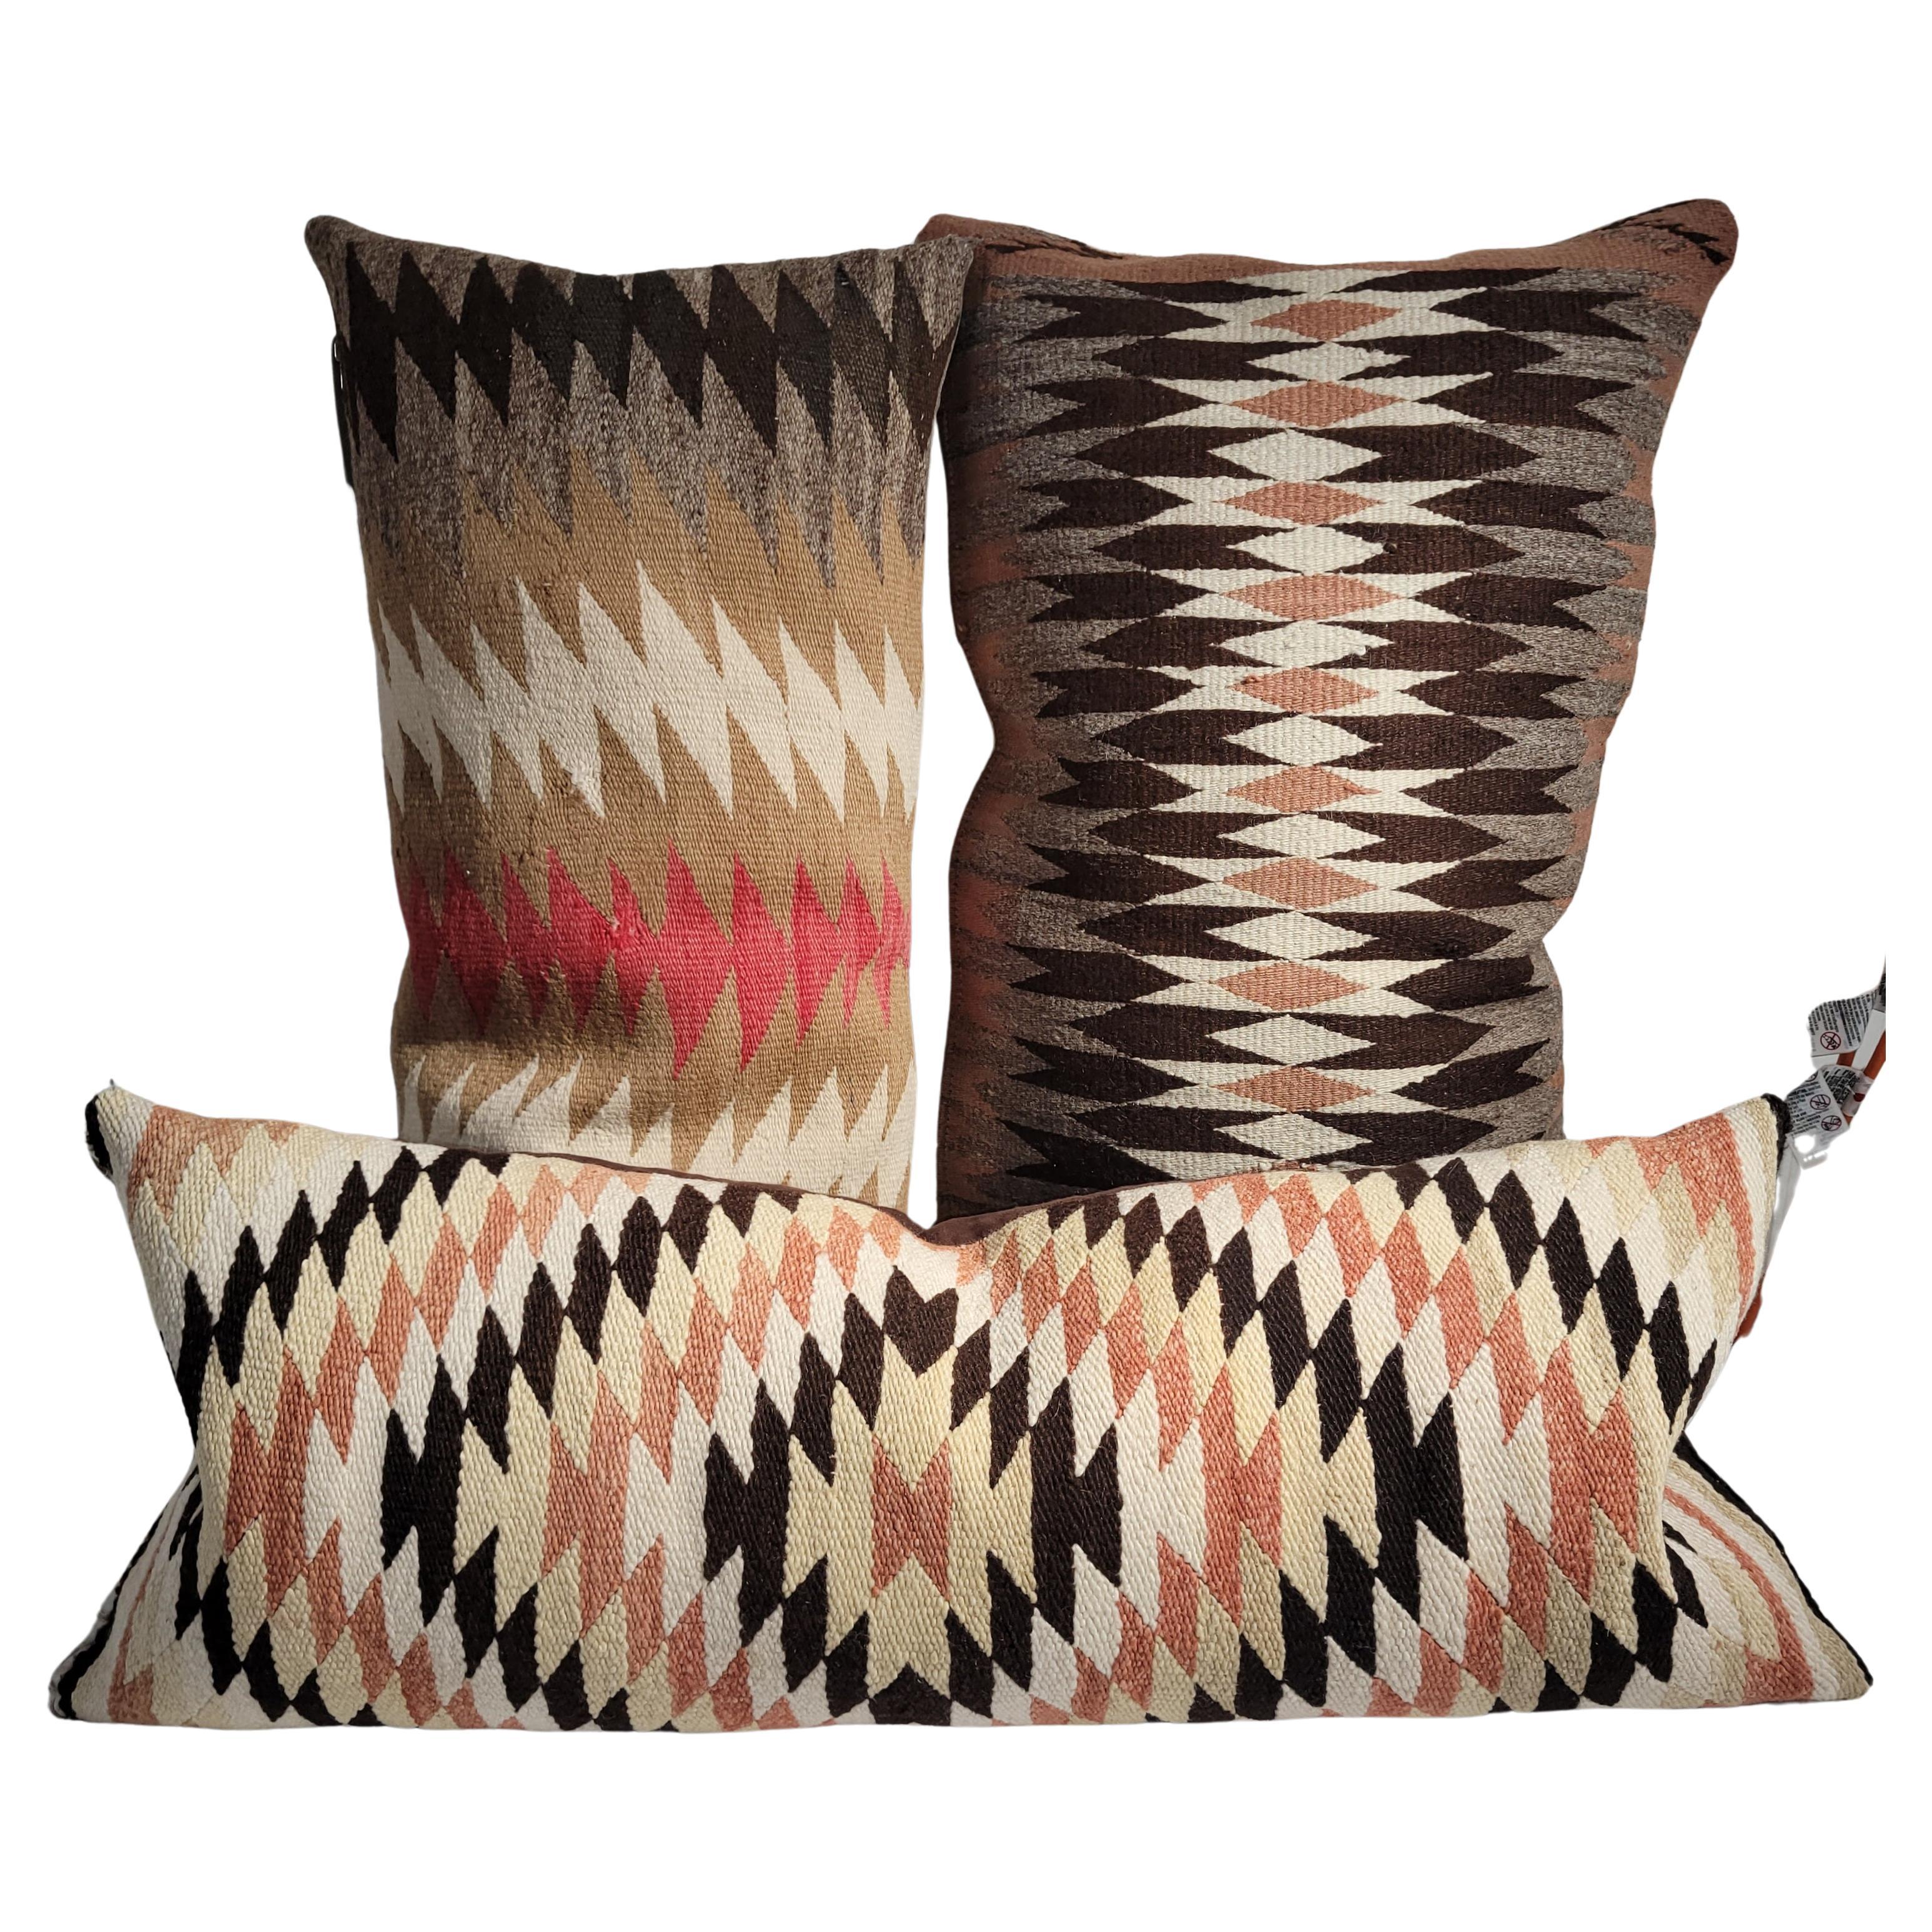 Collection of Three Navajo Indian Woven Pillows 